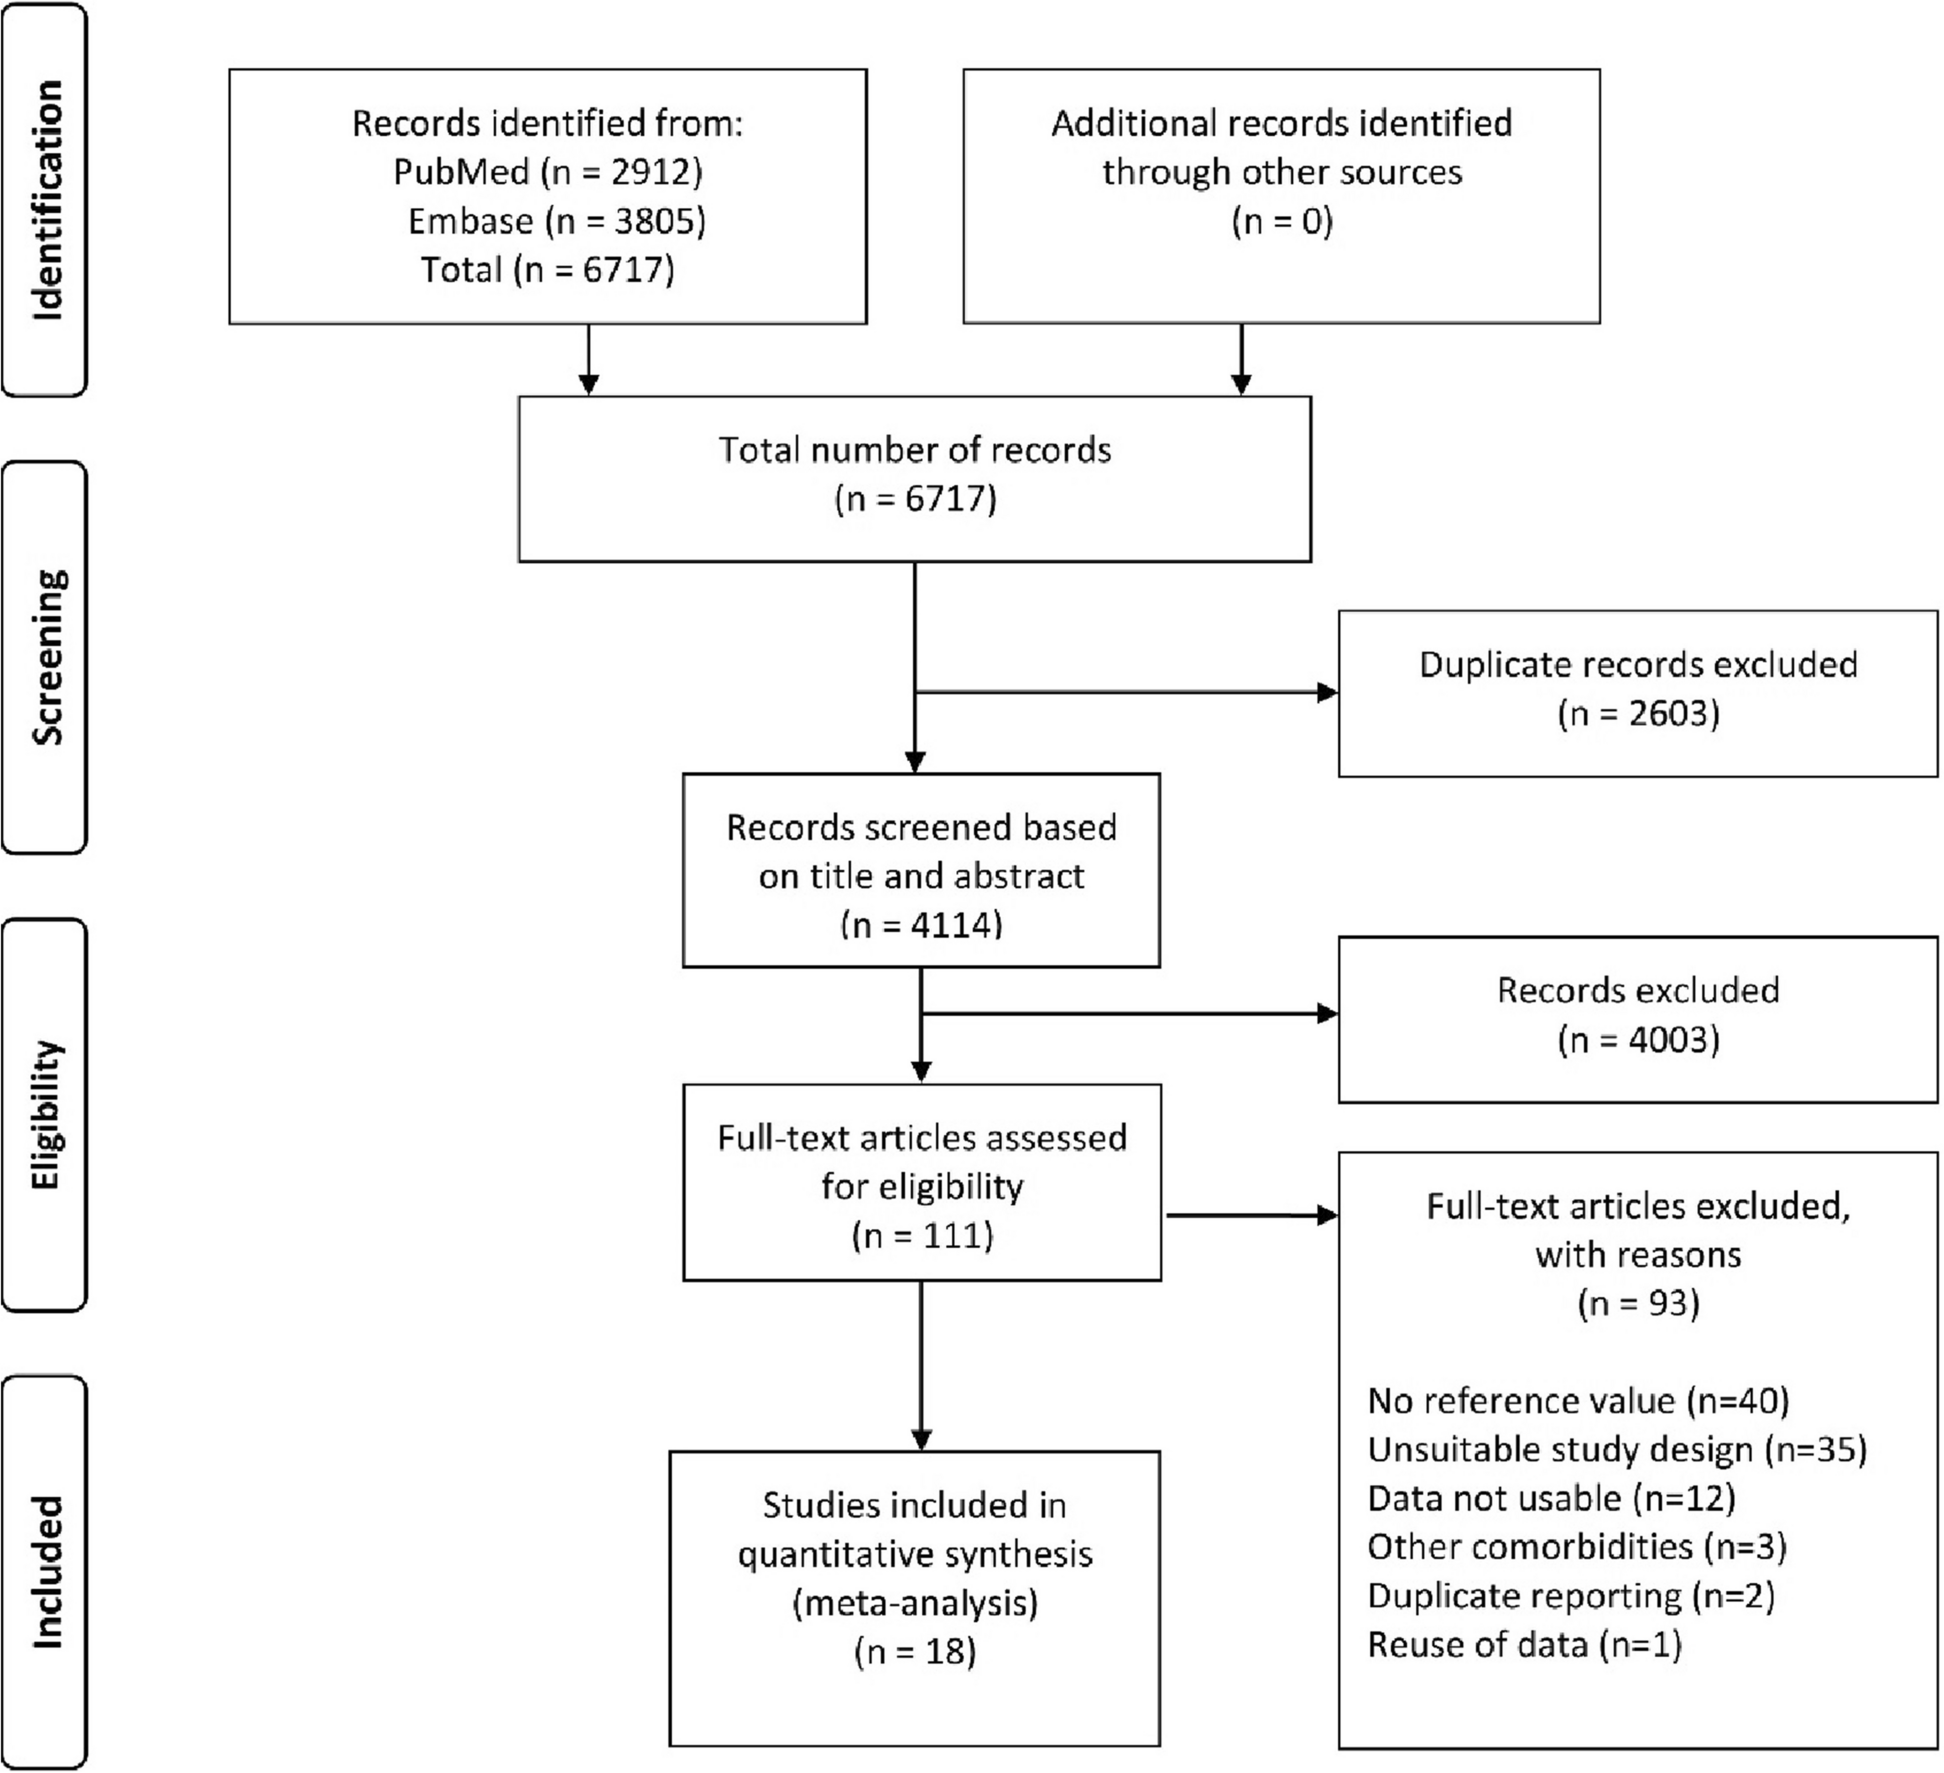 Active plasma renin concentration throughout healthy and complicated pregnancy: a systematic review and meta-analysis